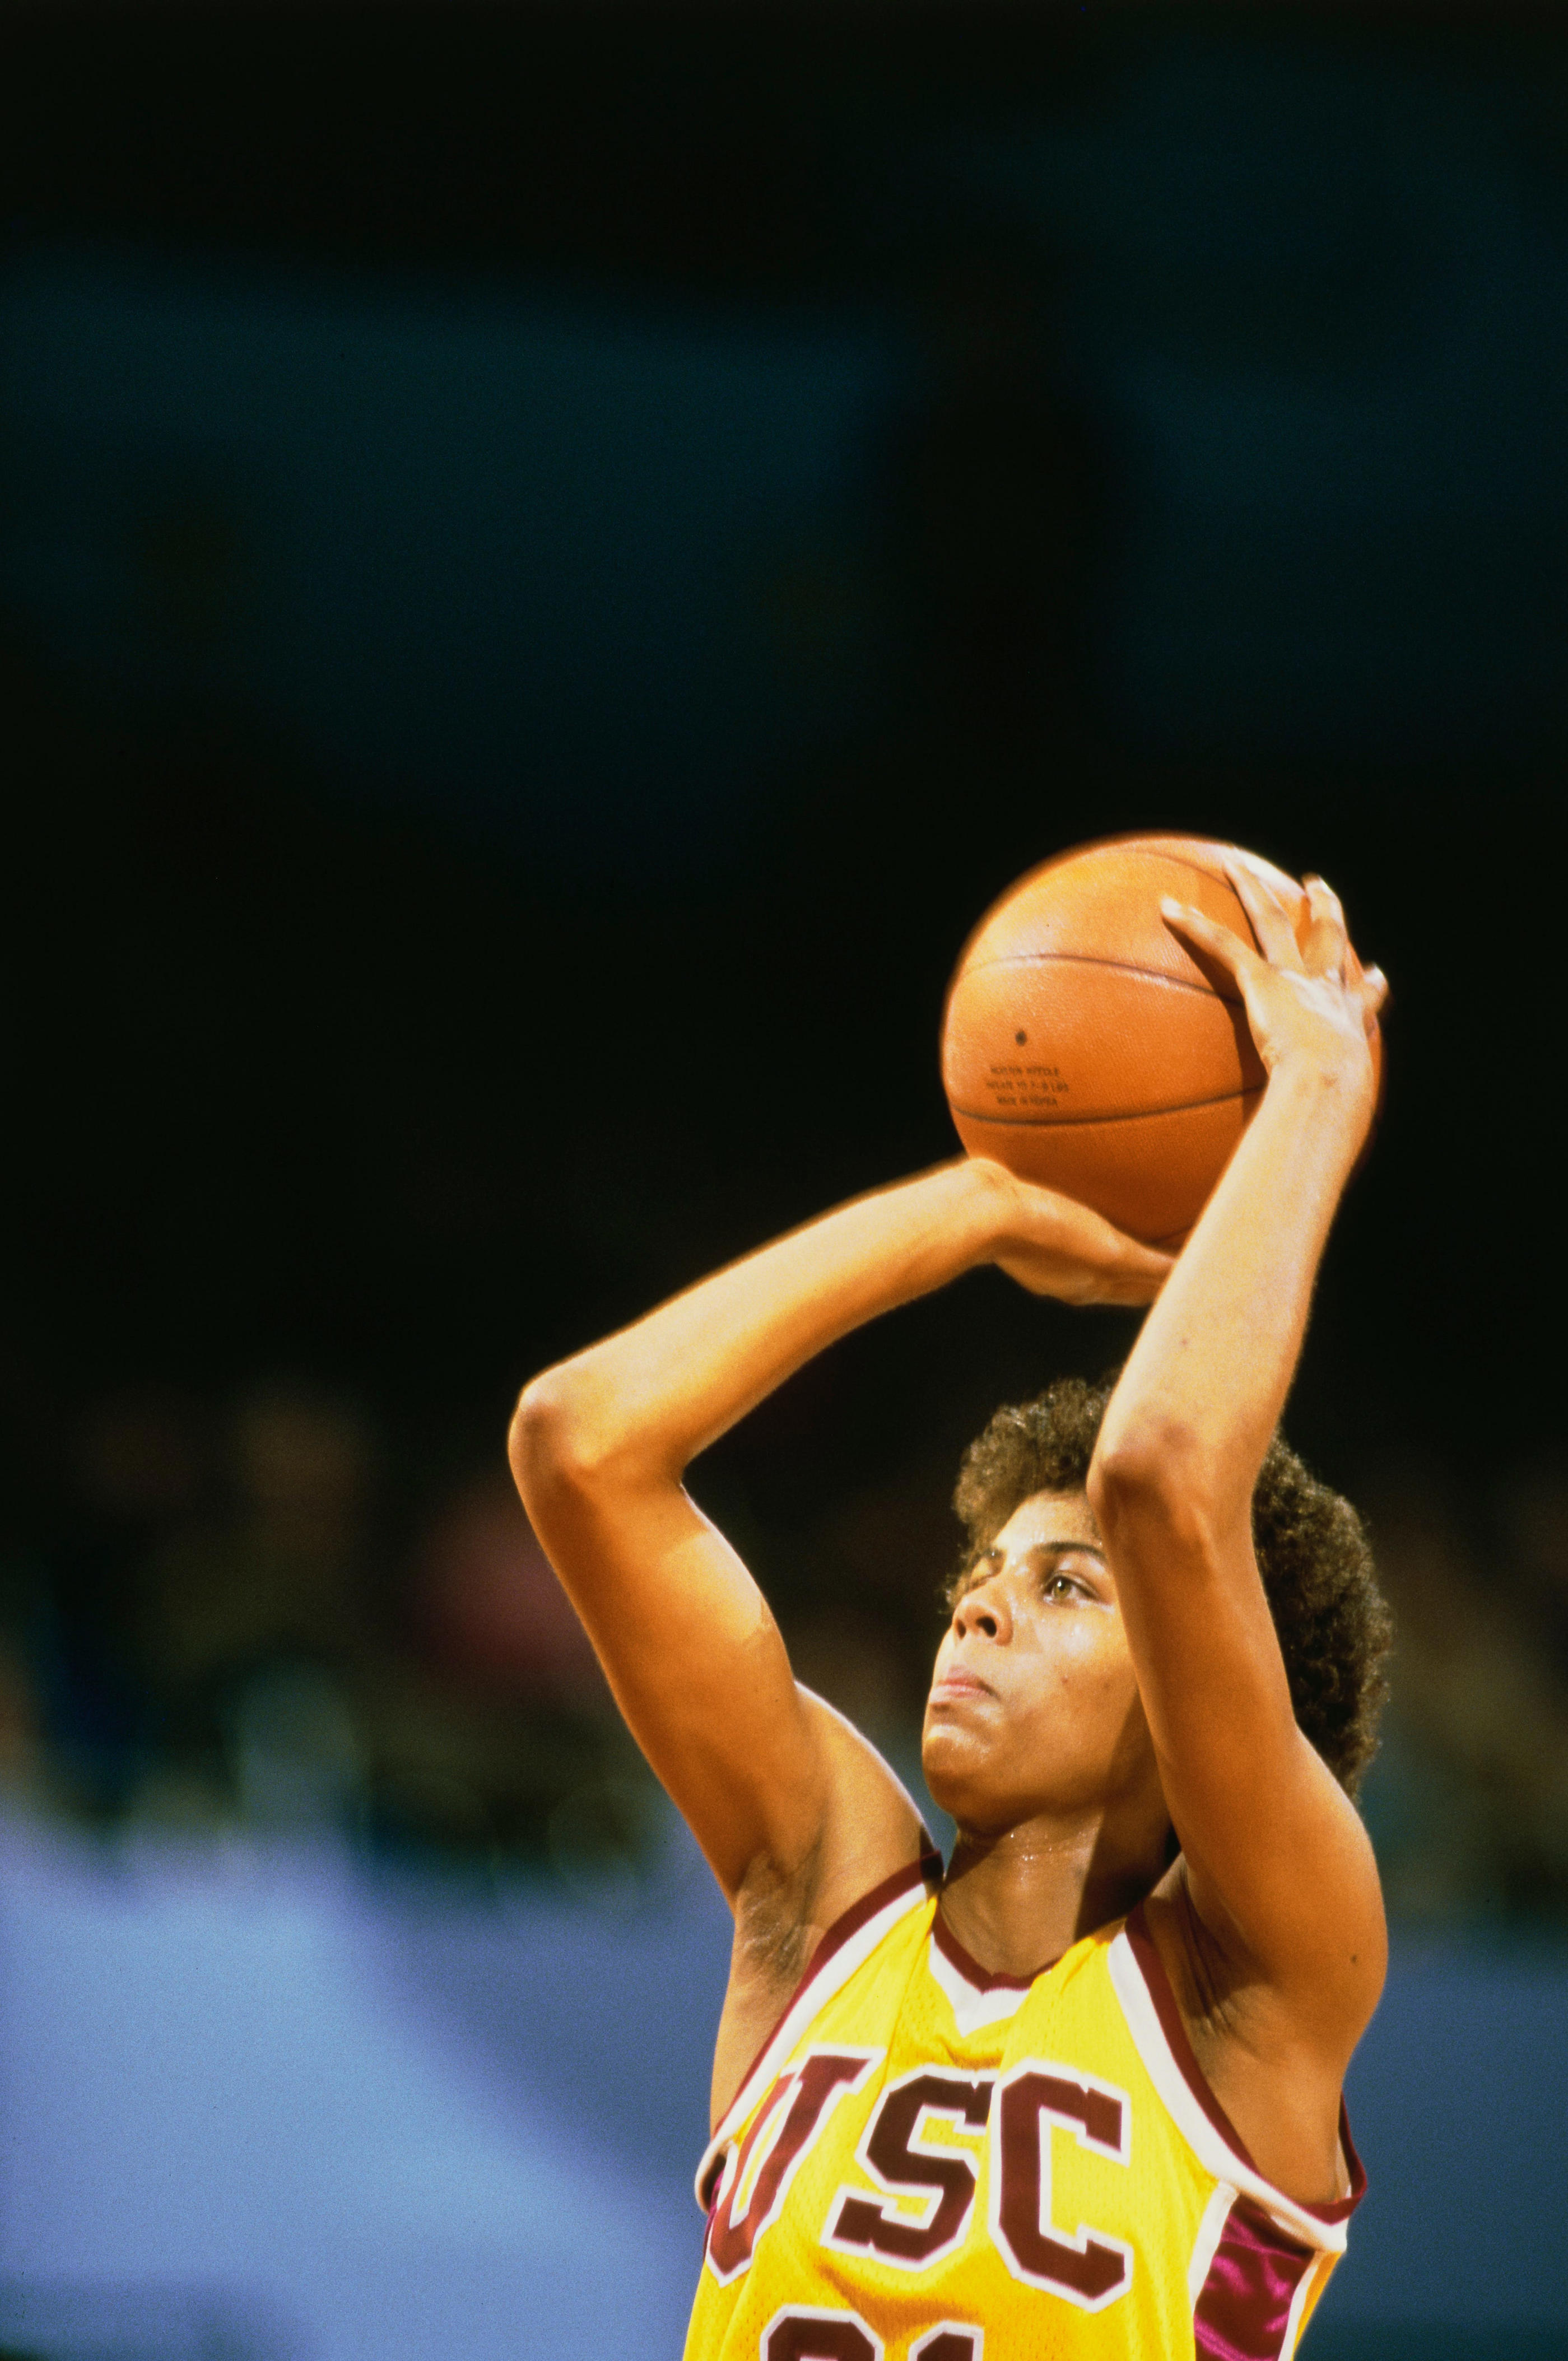 caitlin clark is astonishing. but no one is better than usc's cheryl miller.